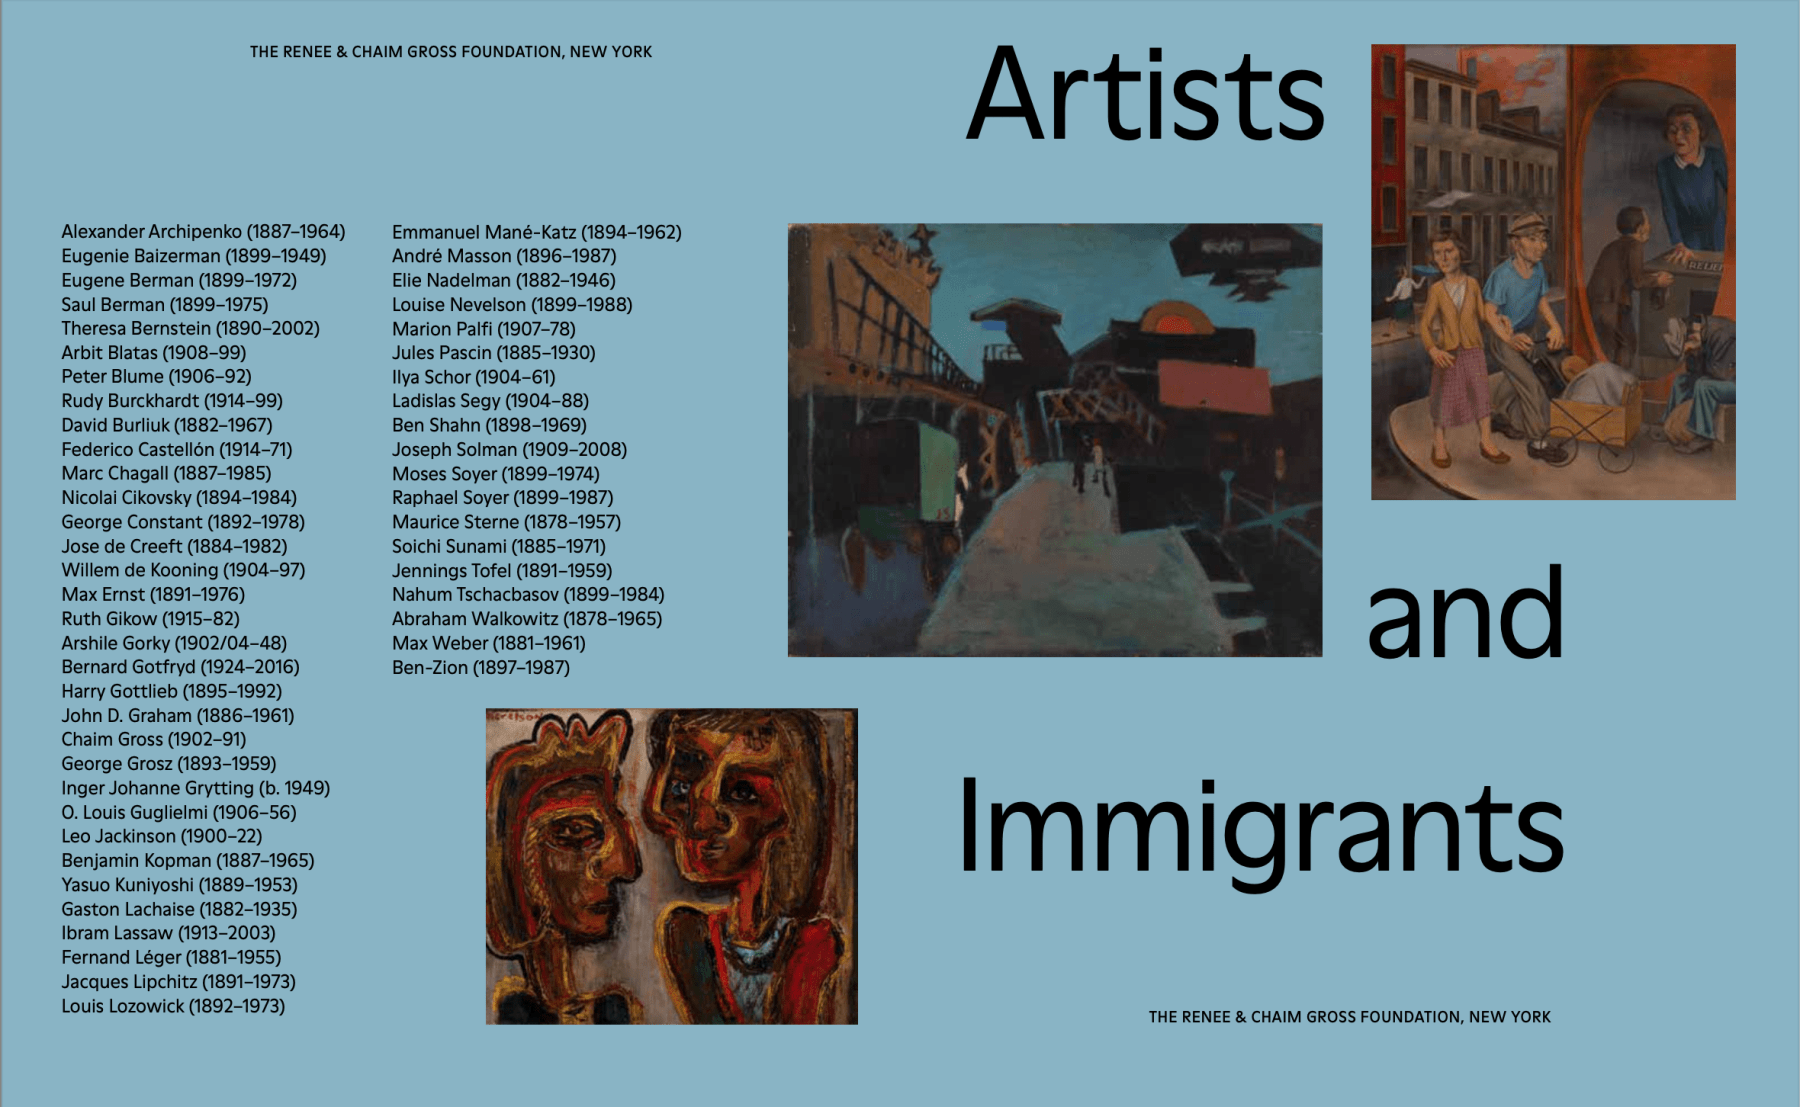 Cover of Artists and Immigrants publication